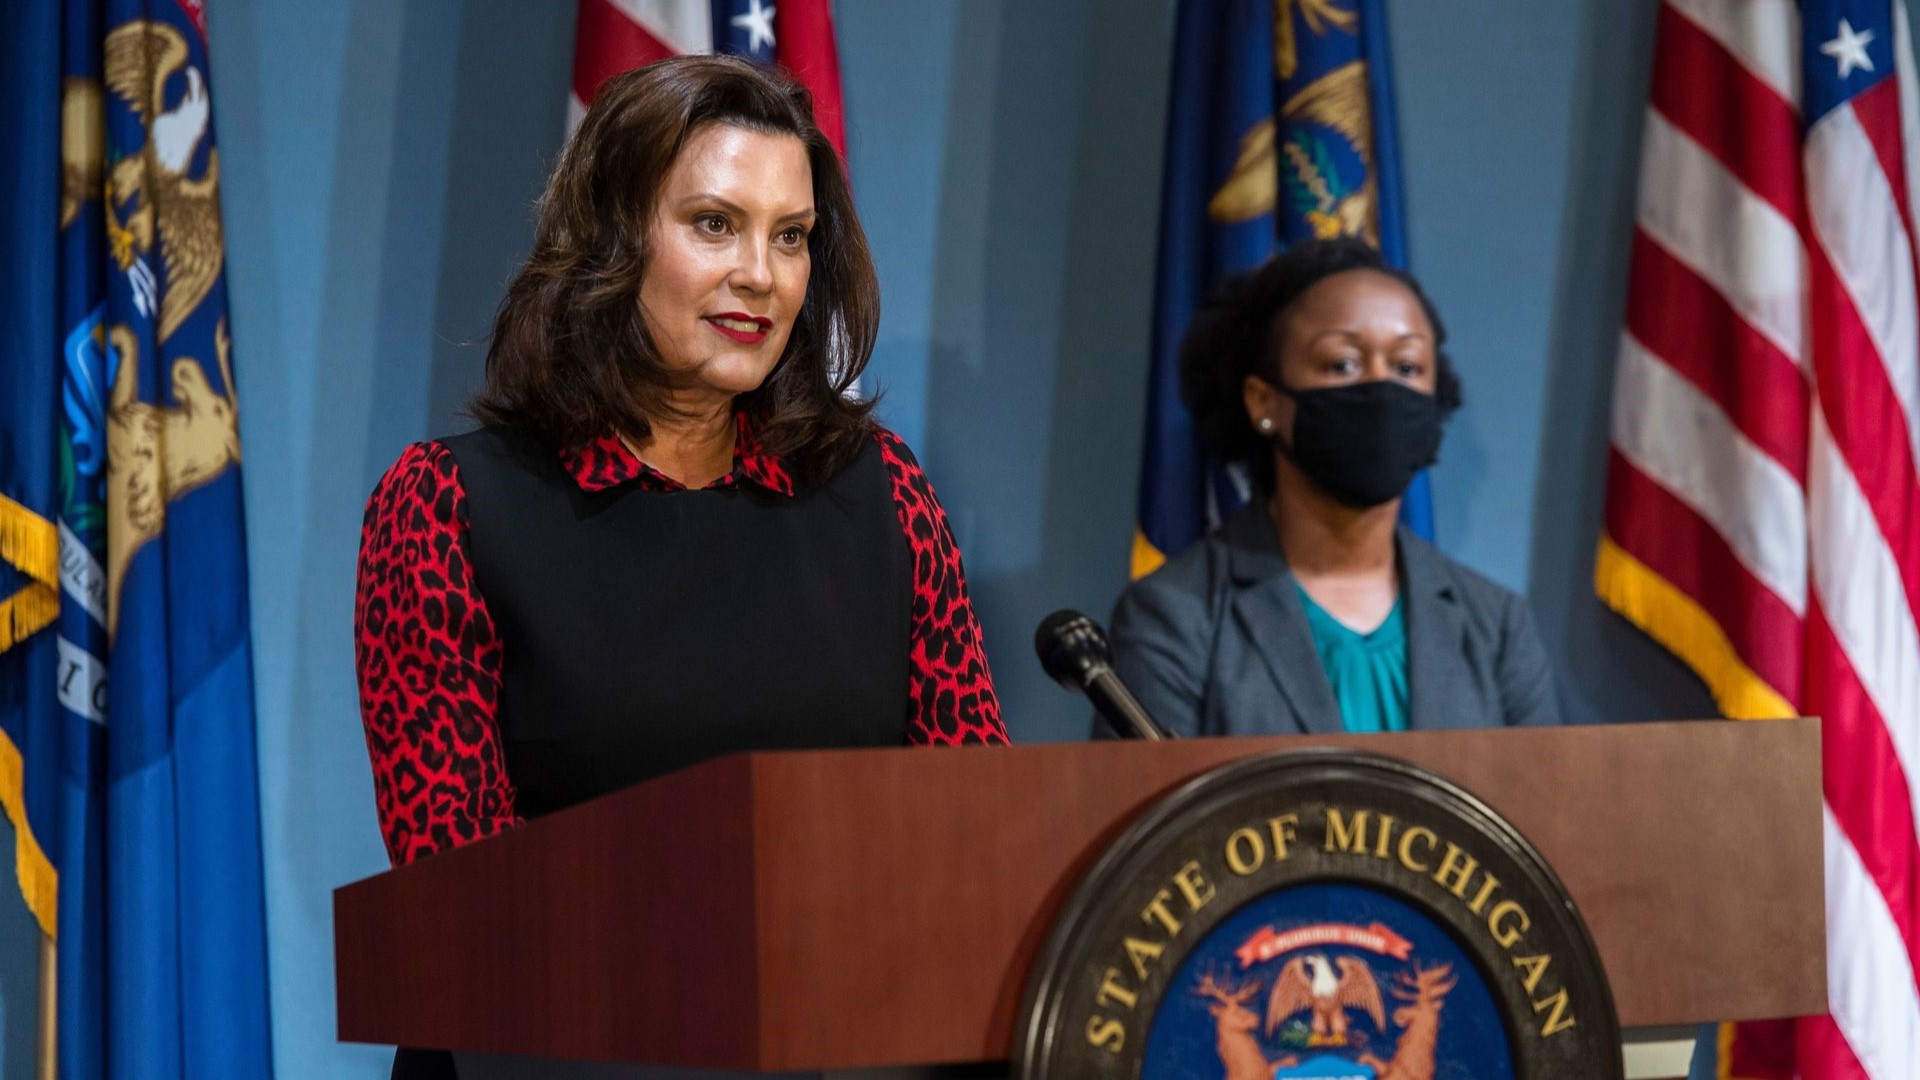 Michigan could backtrack in reopening, Whitmer says